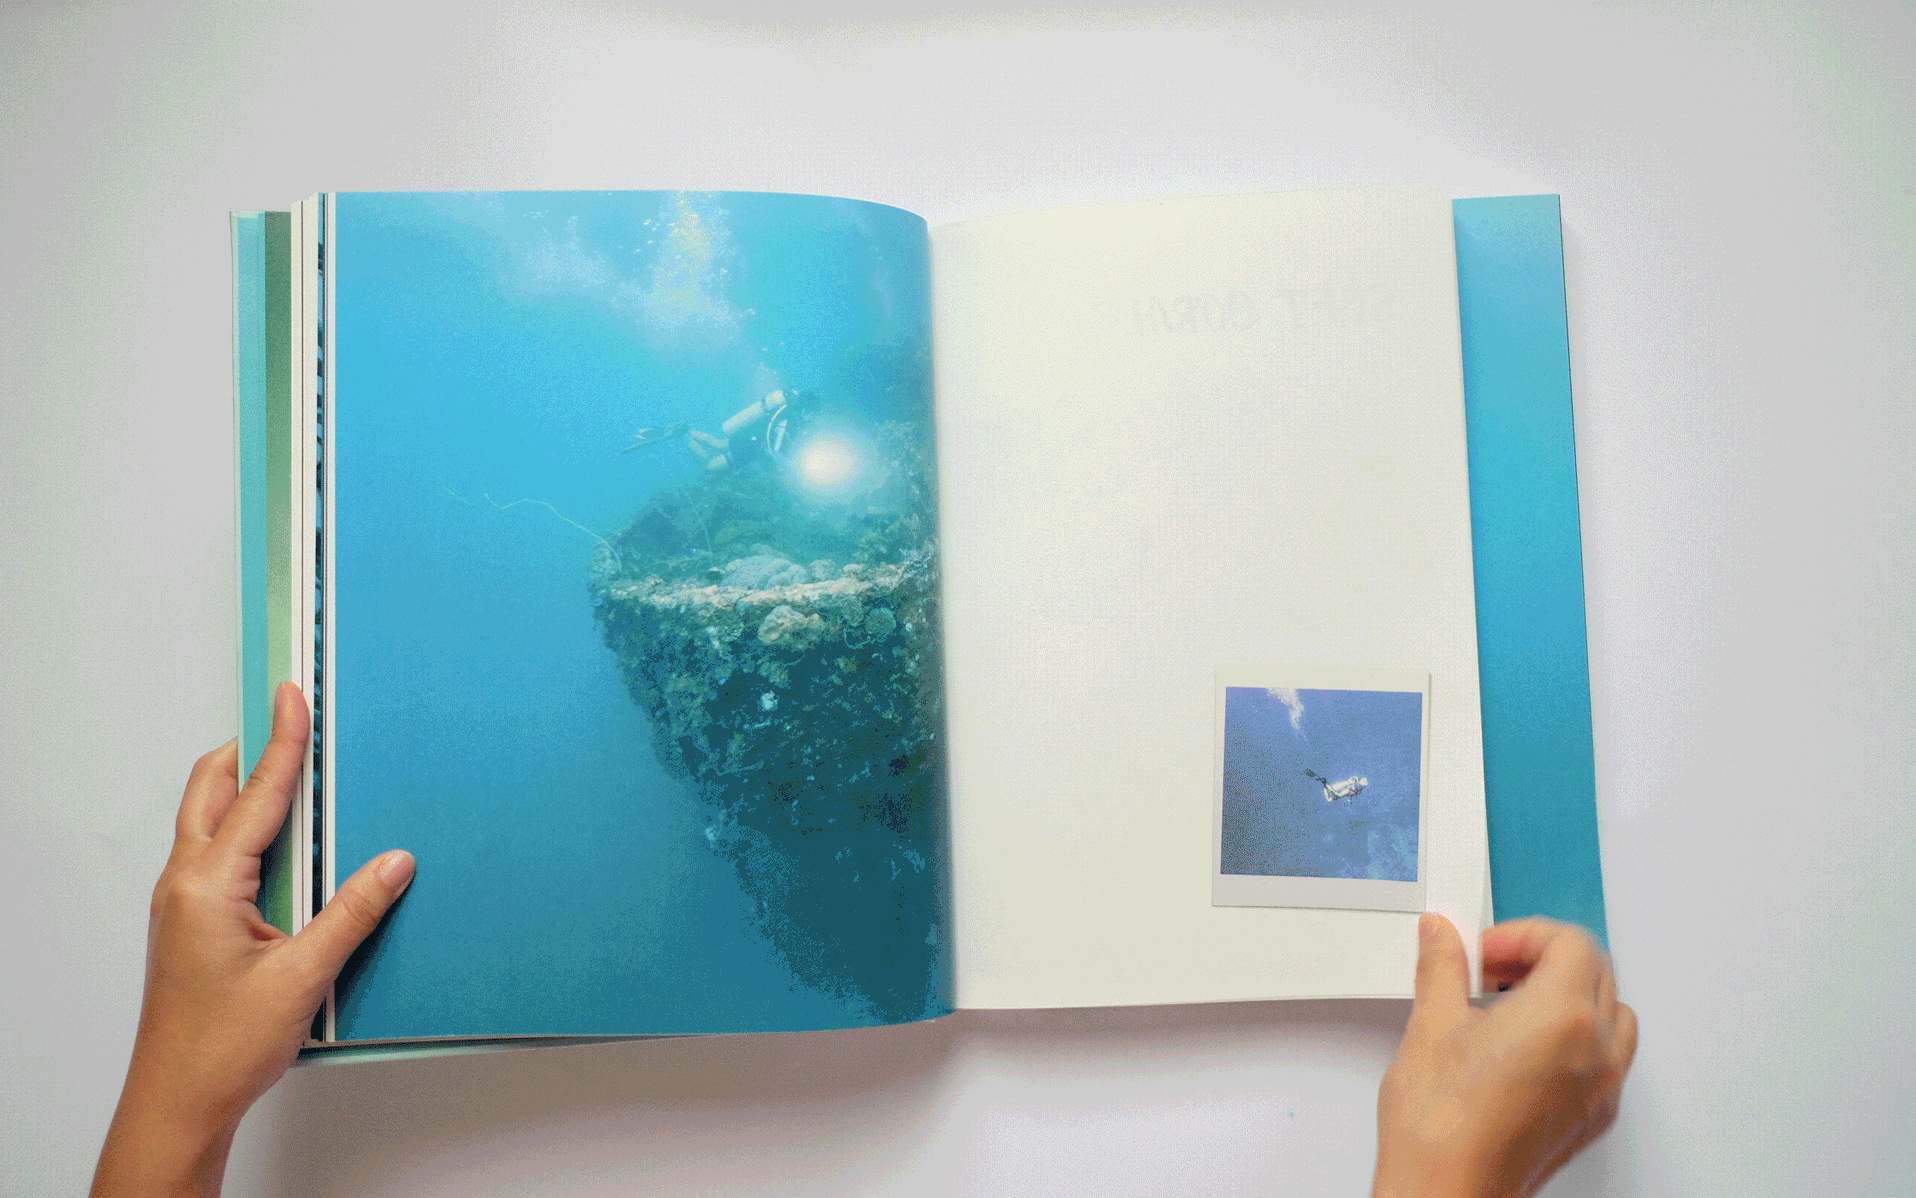 Art of The Ocean - Book Pages art artistic book book design design handwriting illustration insertion page journal layout minimalist ocean painting photo book photography publication sea surrealism underwater watercolor